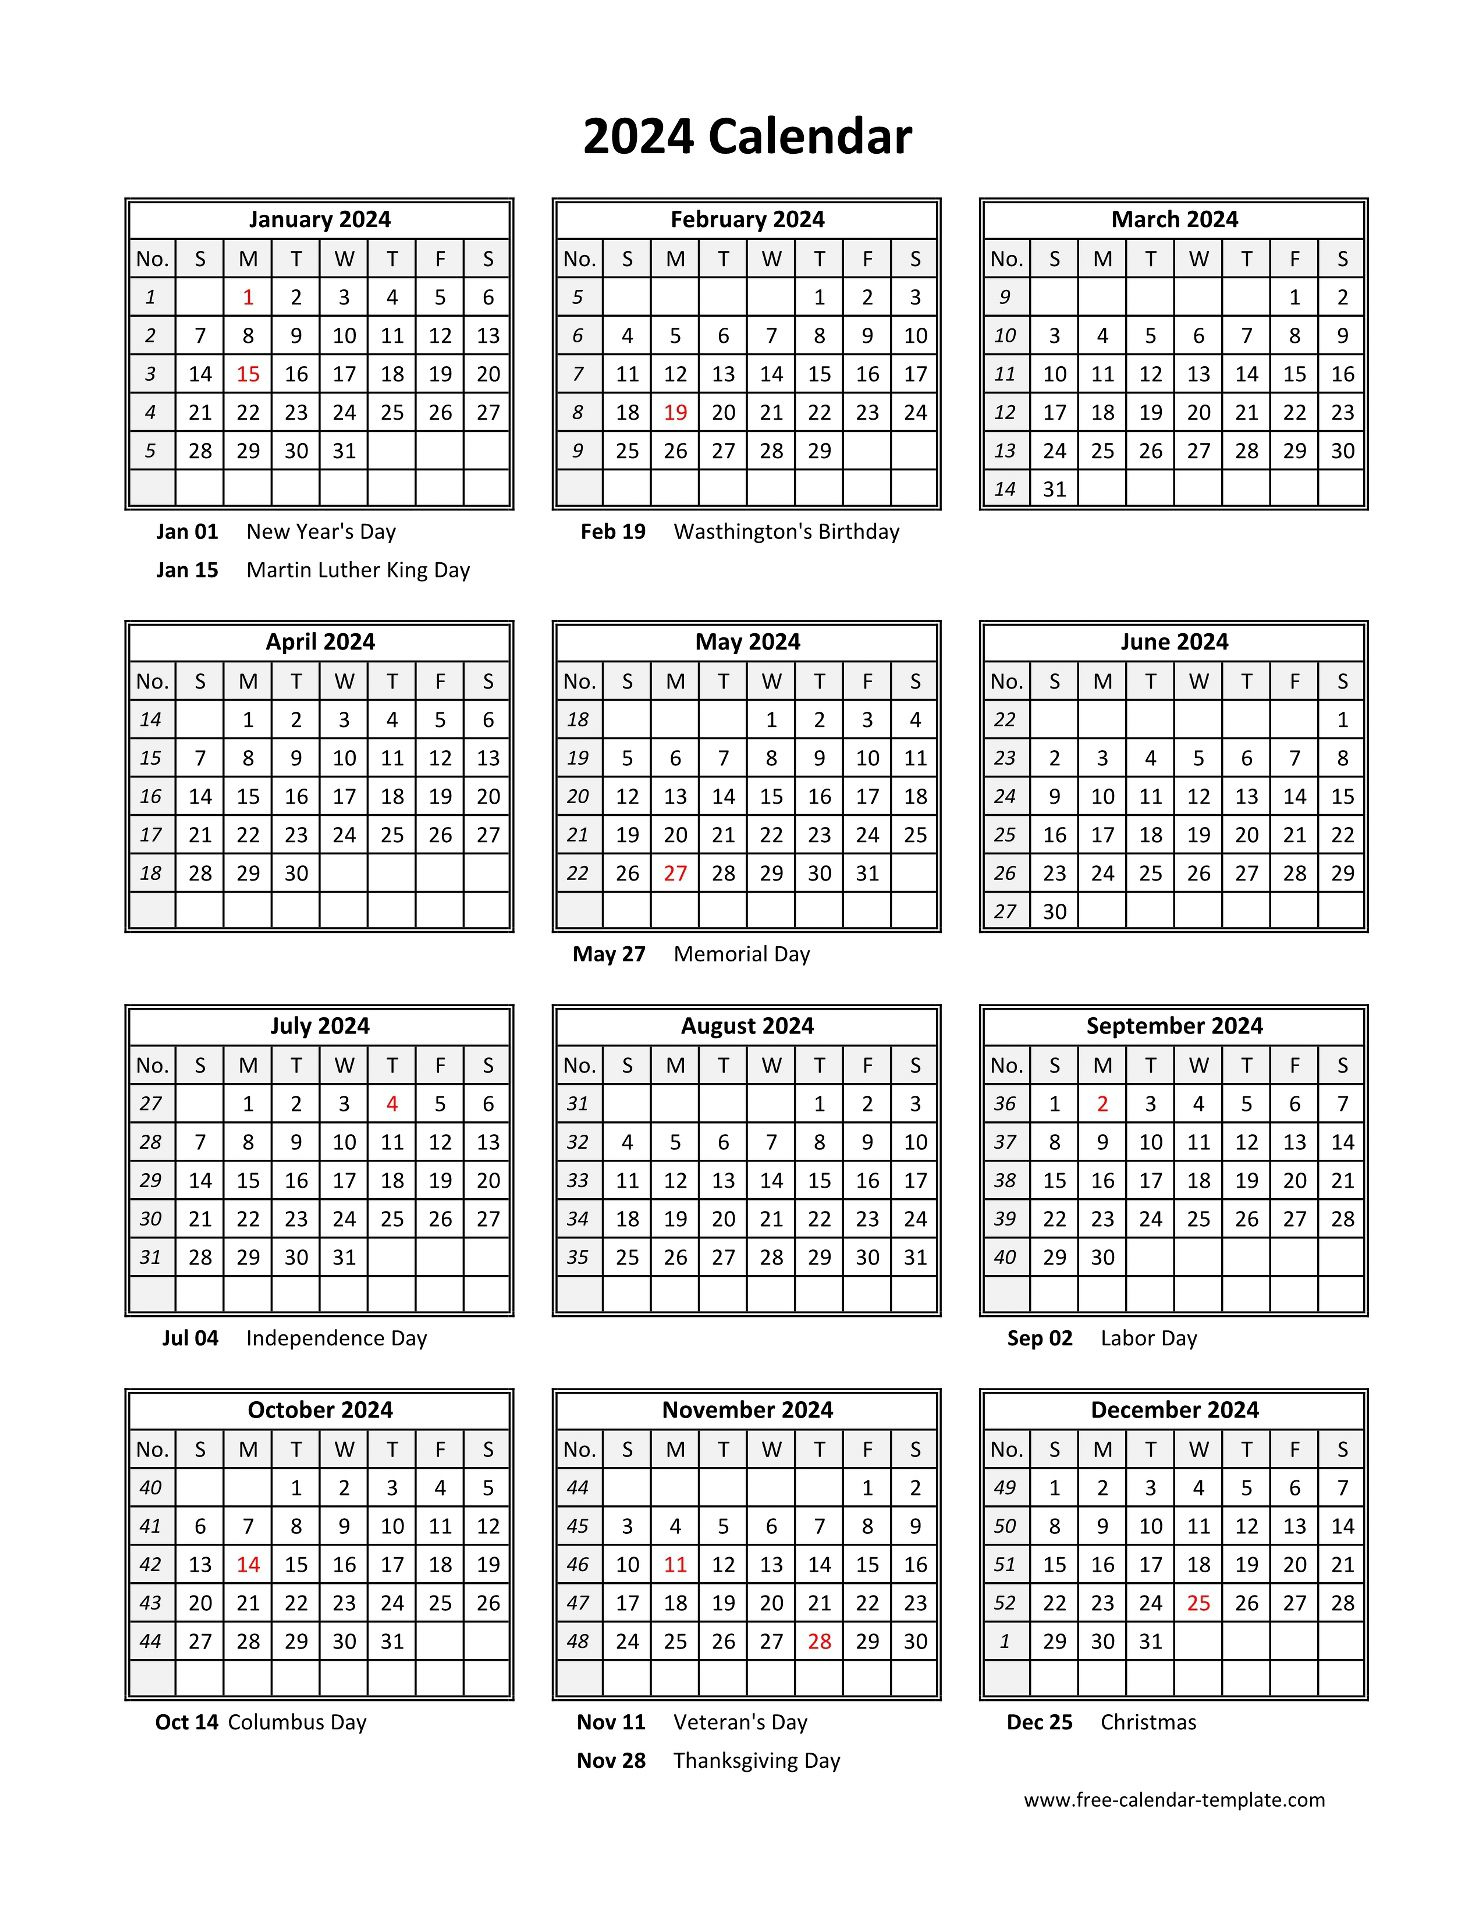 Yearly Printable Calendar 2024 With Holidays | Free-Calendar | Calendar Template 2024 Printable Free Pdf